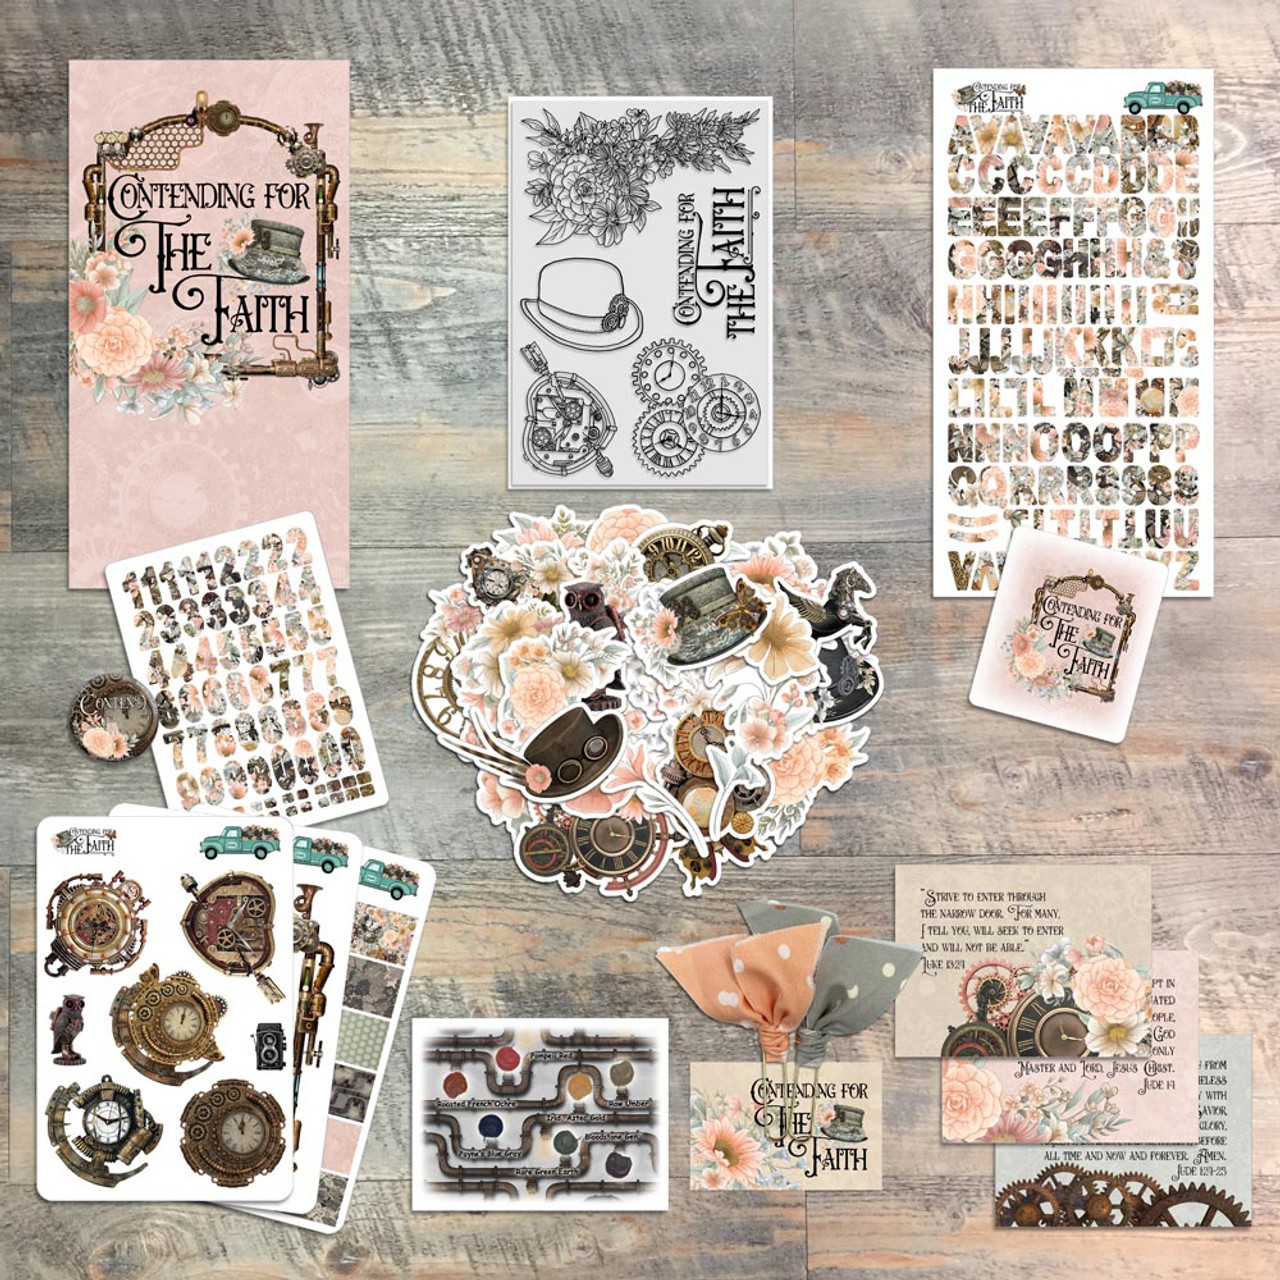 Tim Holtz Distress Embossing Pen - 2/Pkg - Add embossed designs to your  bible journaling pages! - ByTheWell4God